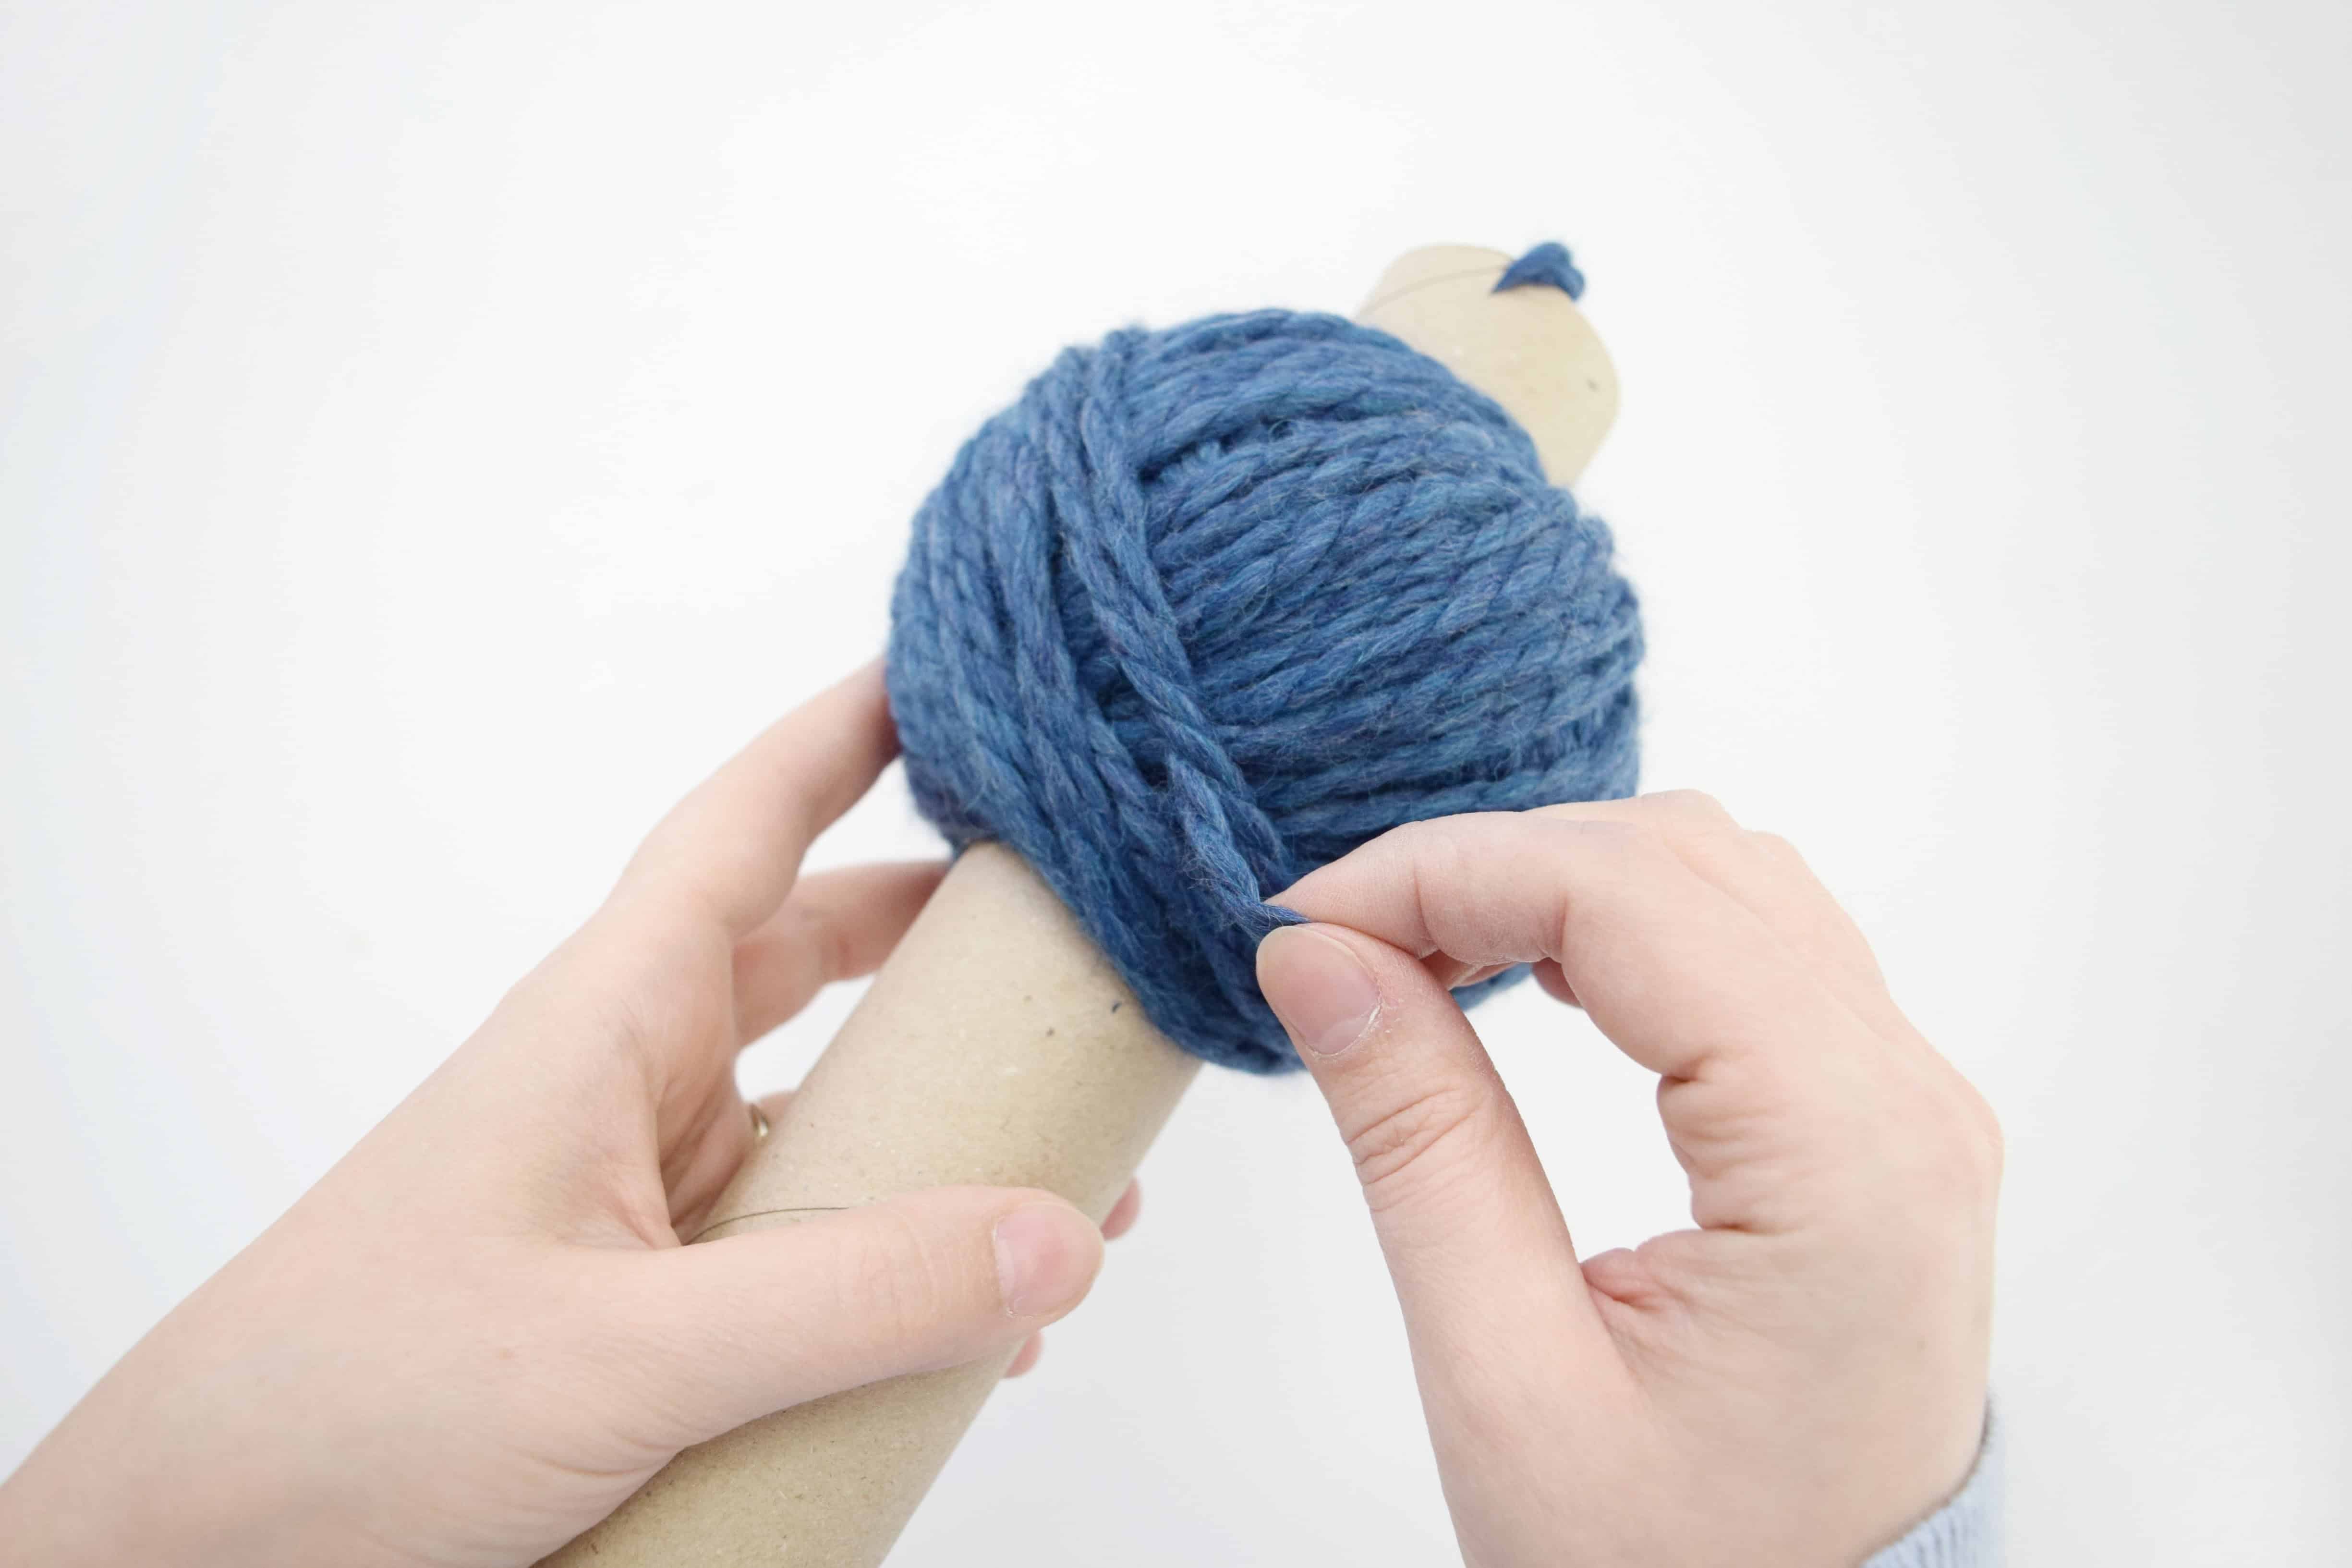 How to Roll a Center Pull Yarn Ball by Hand